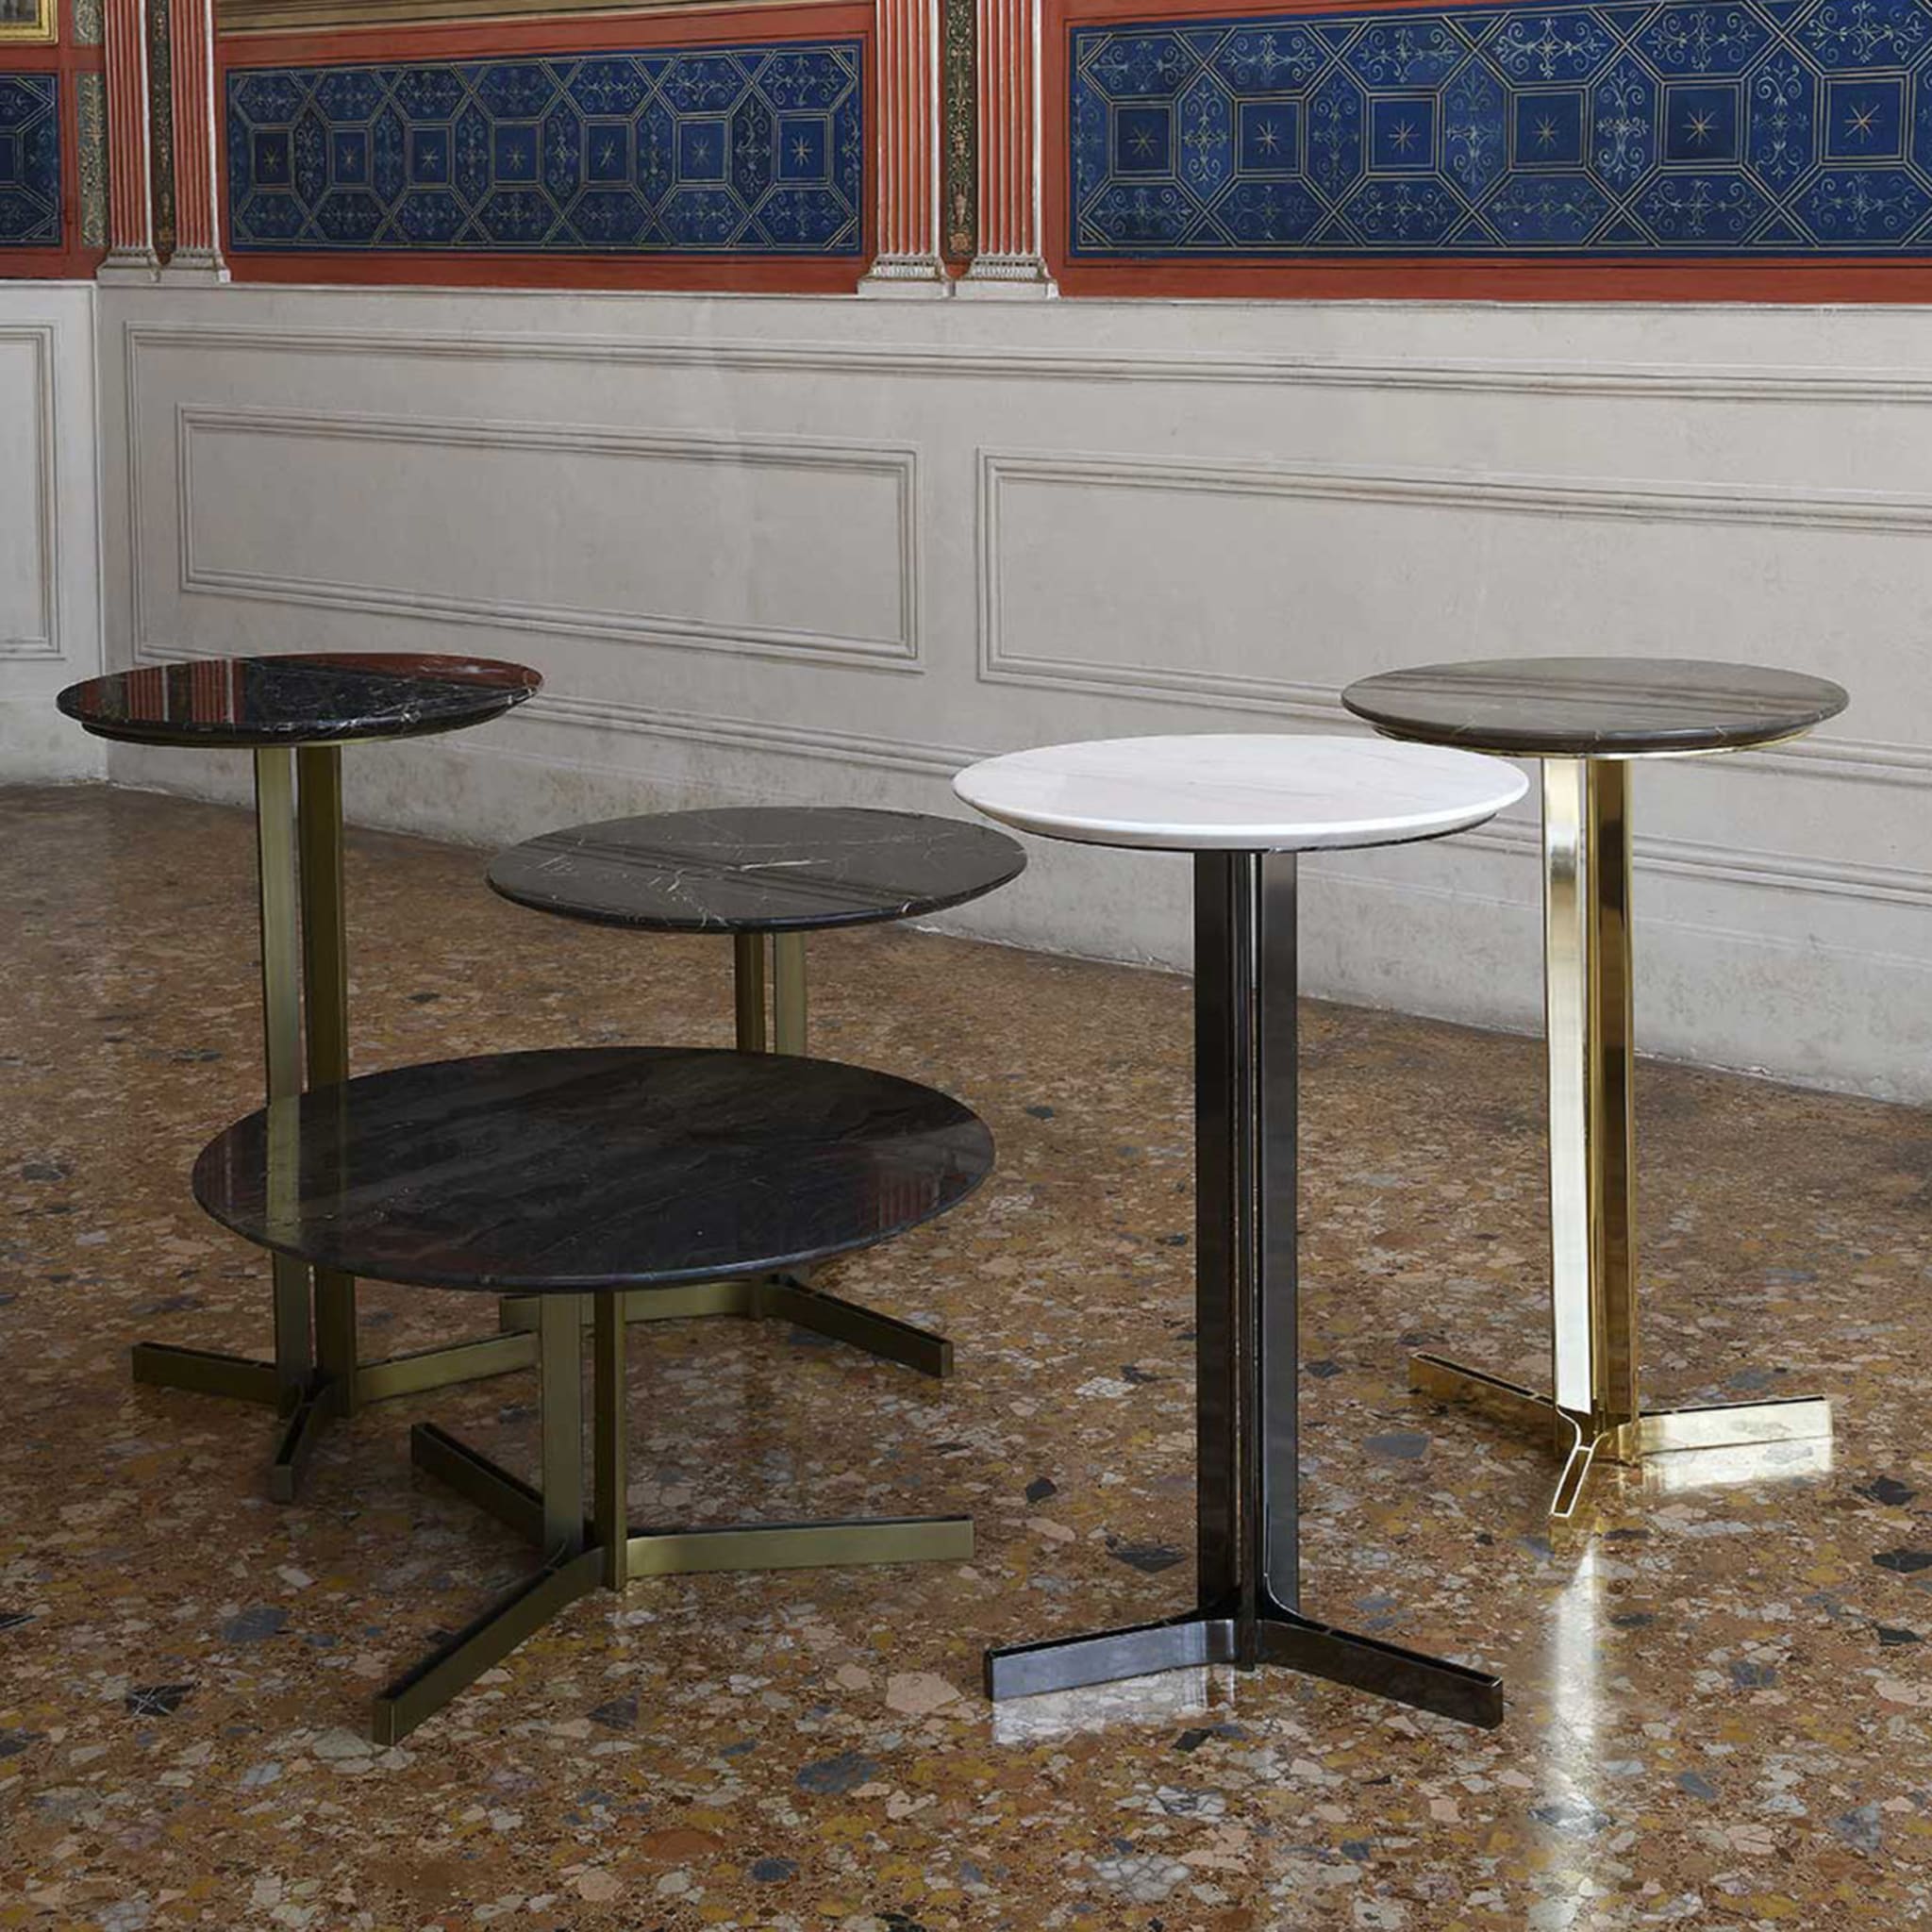 Ceo Cocktail Table with Moresco Imperiale Marble Top - Alternative view 1